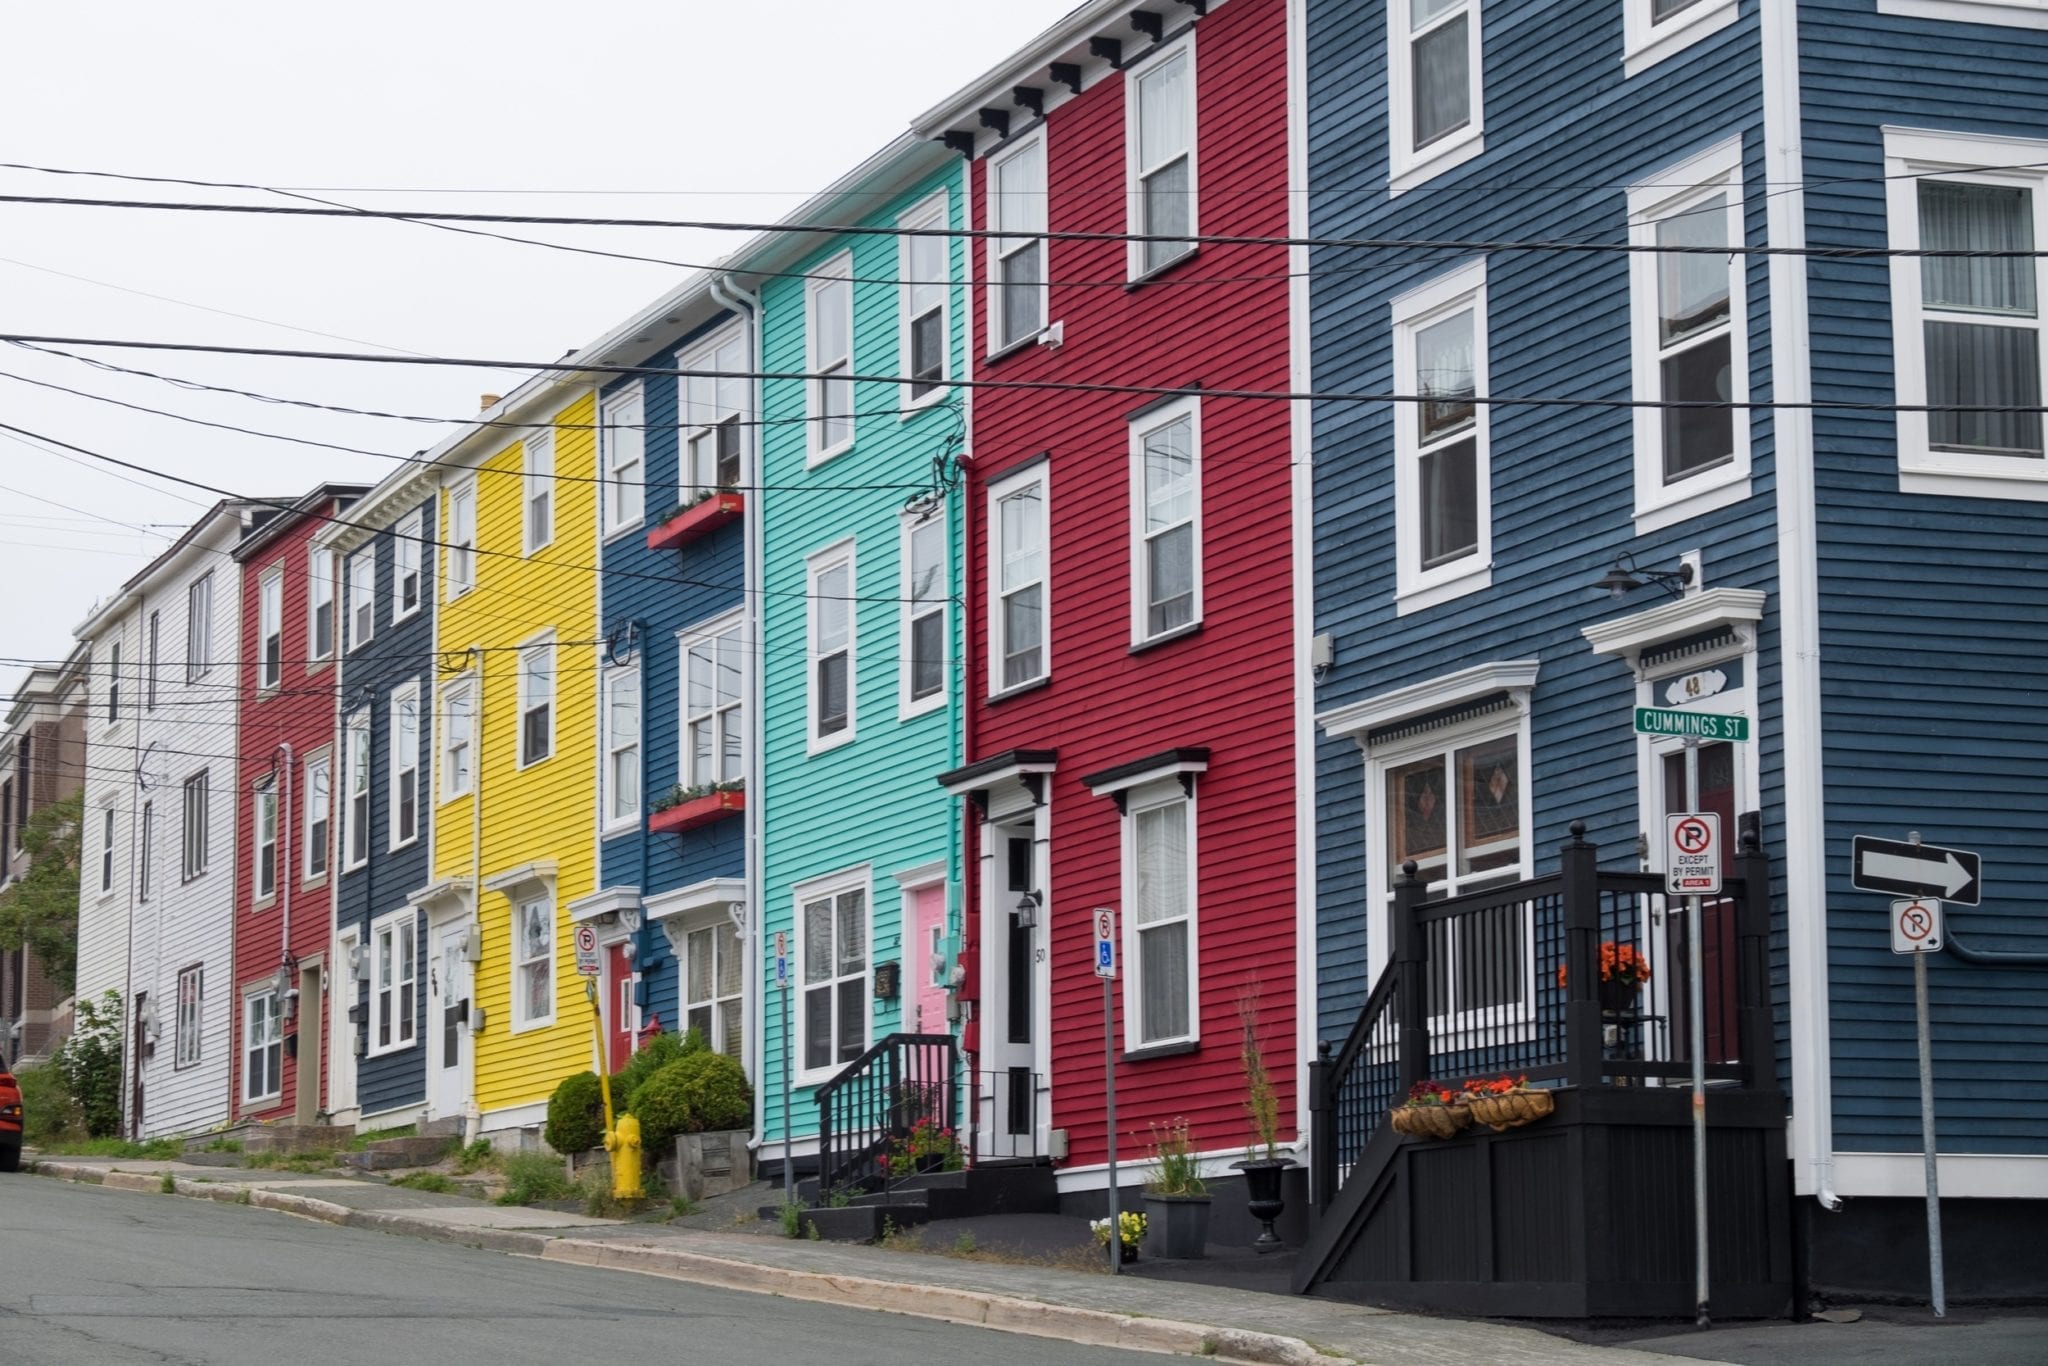 A row of brightly colored square houses in St. John's: yellowfins, blue, sea green, burgundy, and navy.